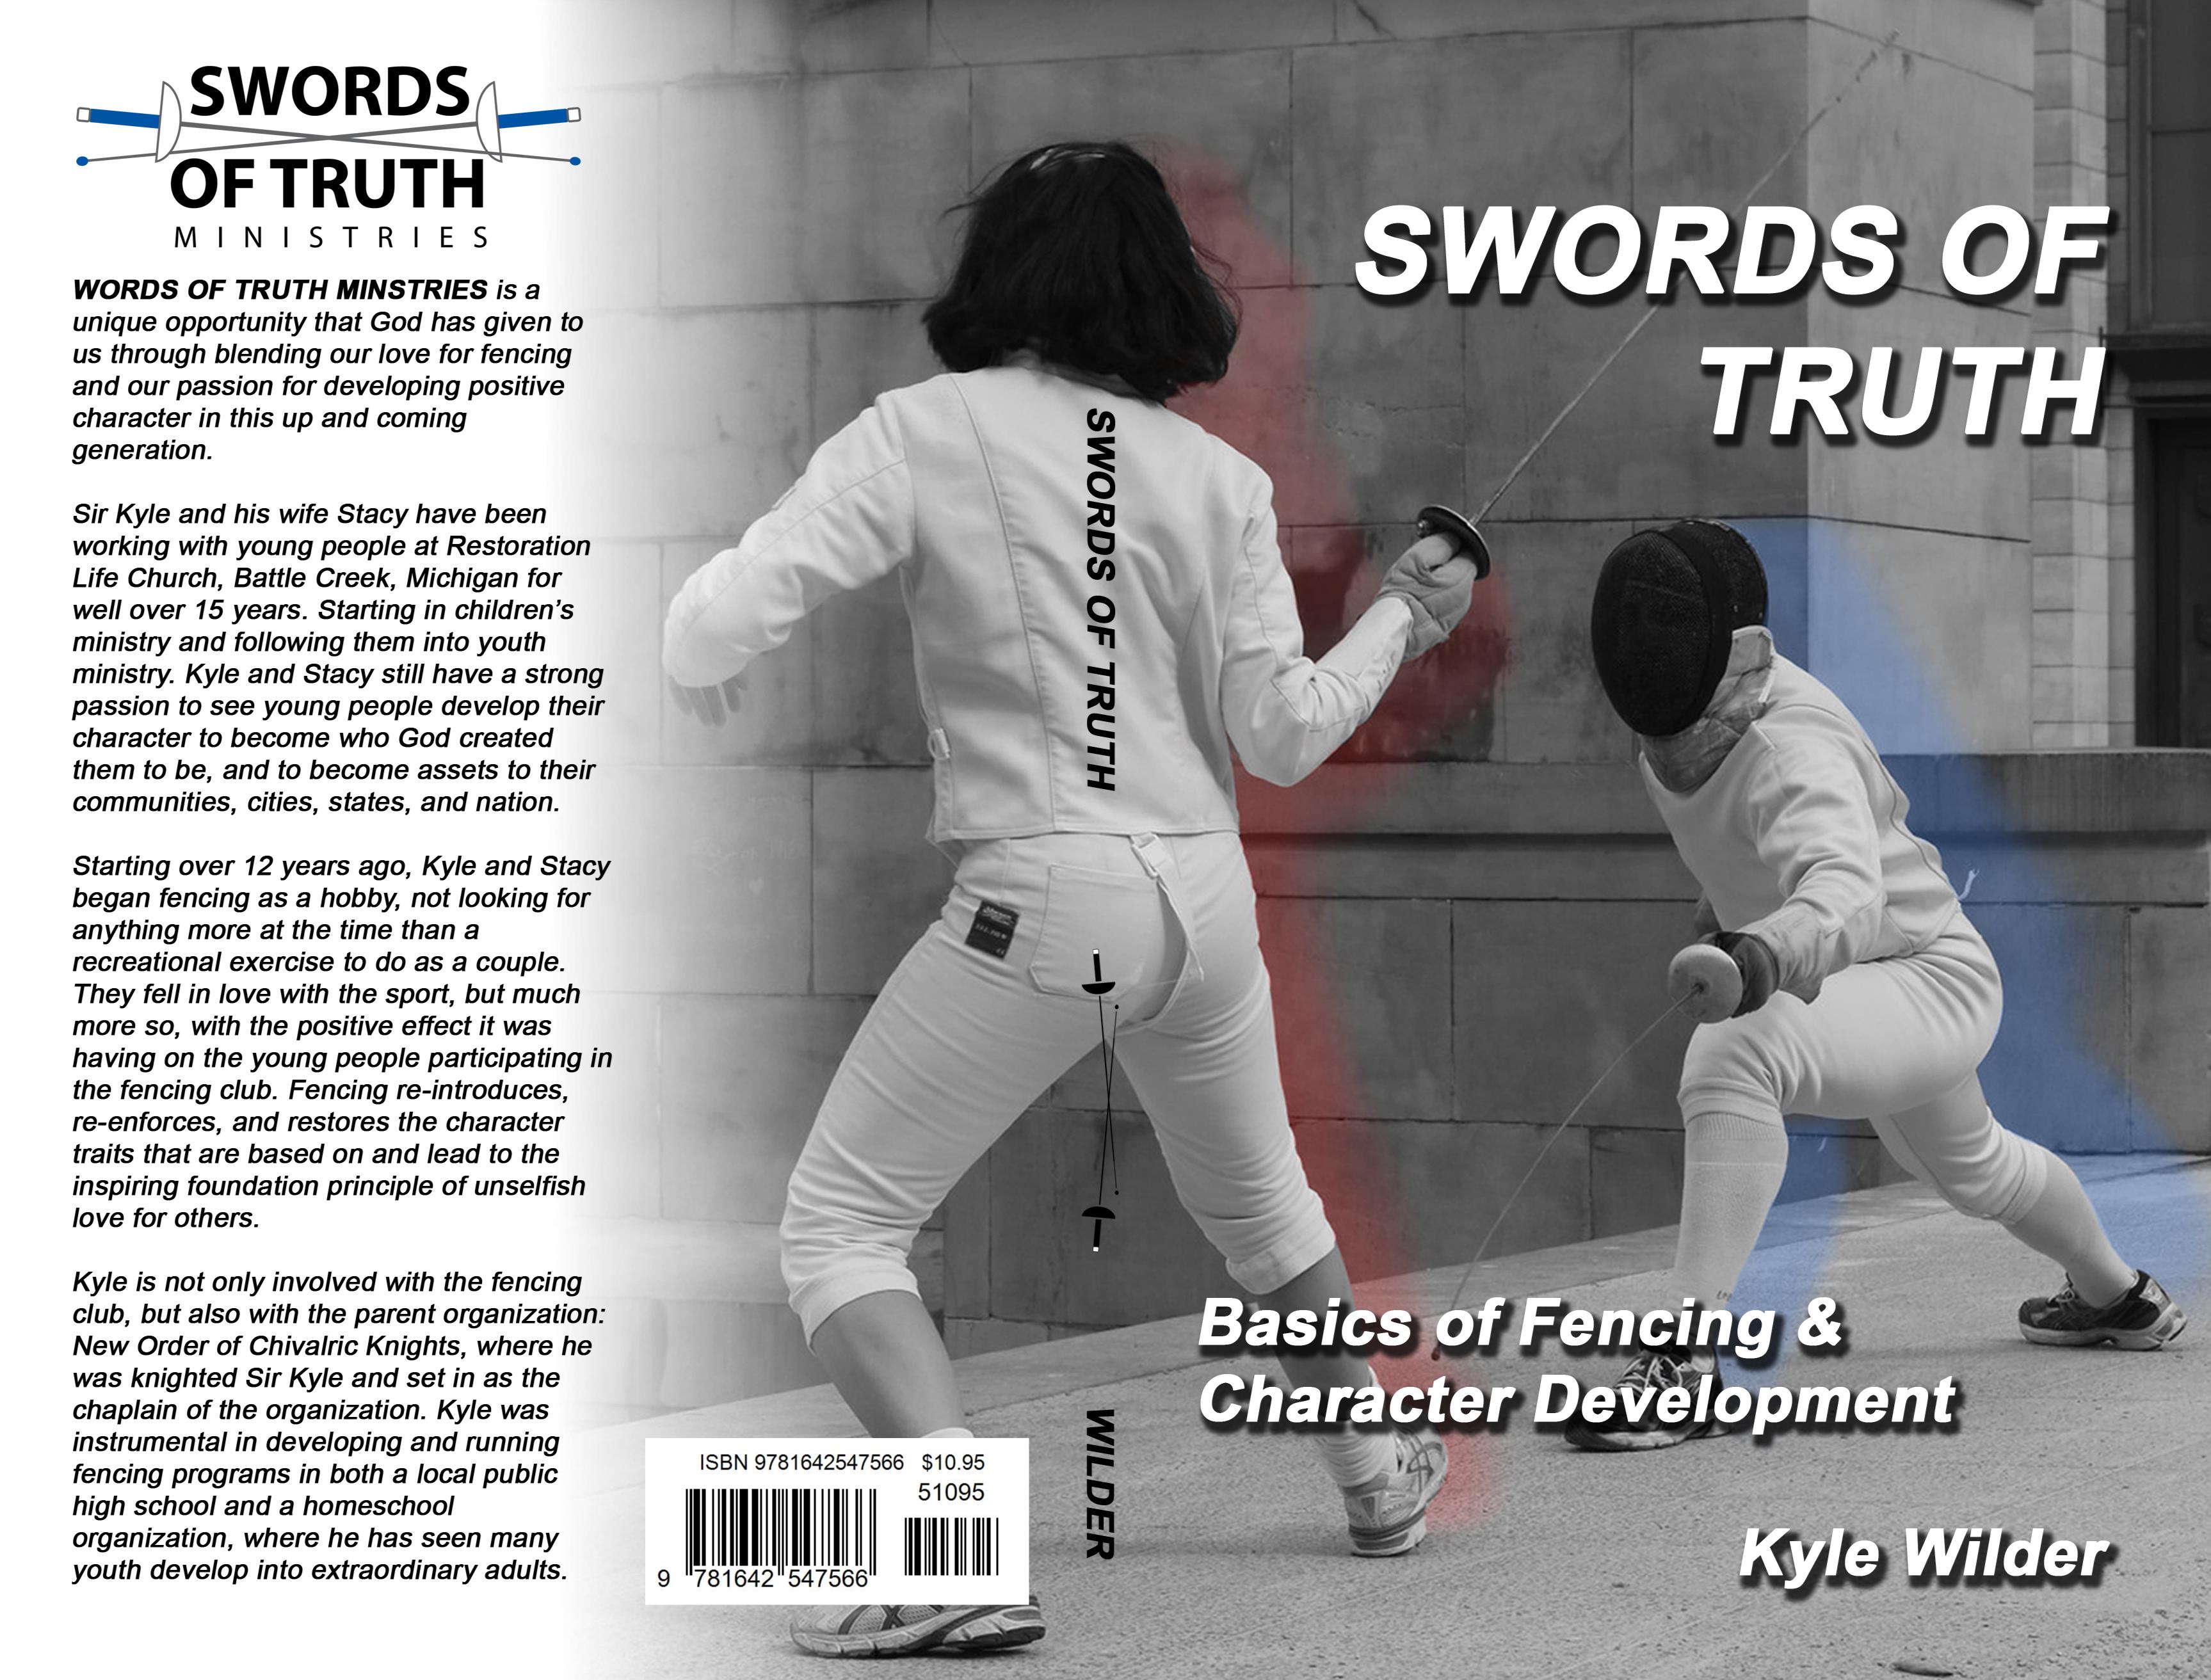 SWORDS OF TRUTH Basics of Fencing & Character Development cover image